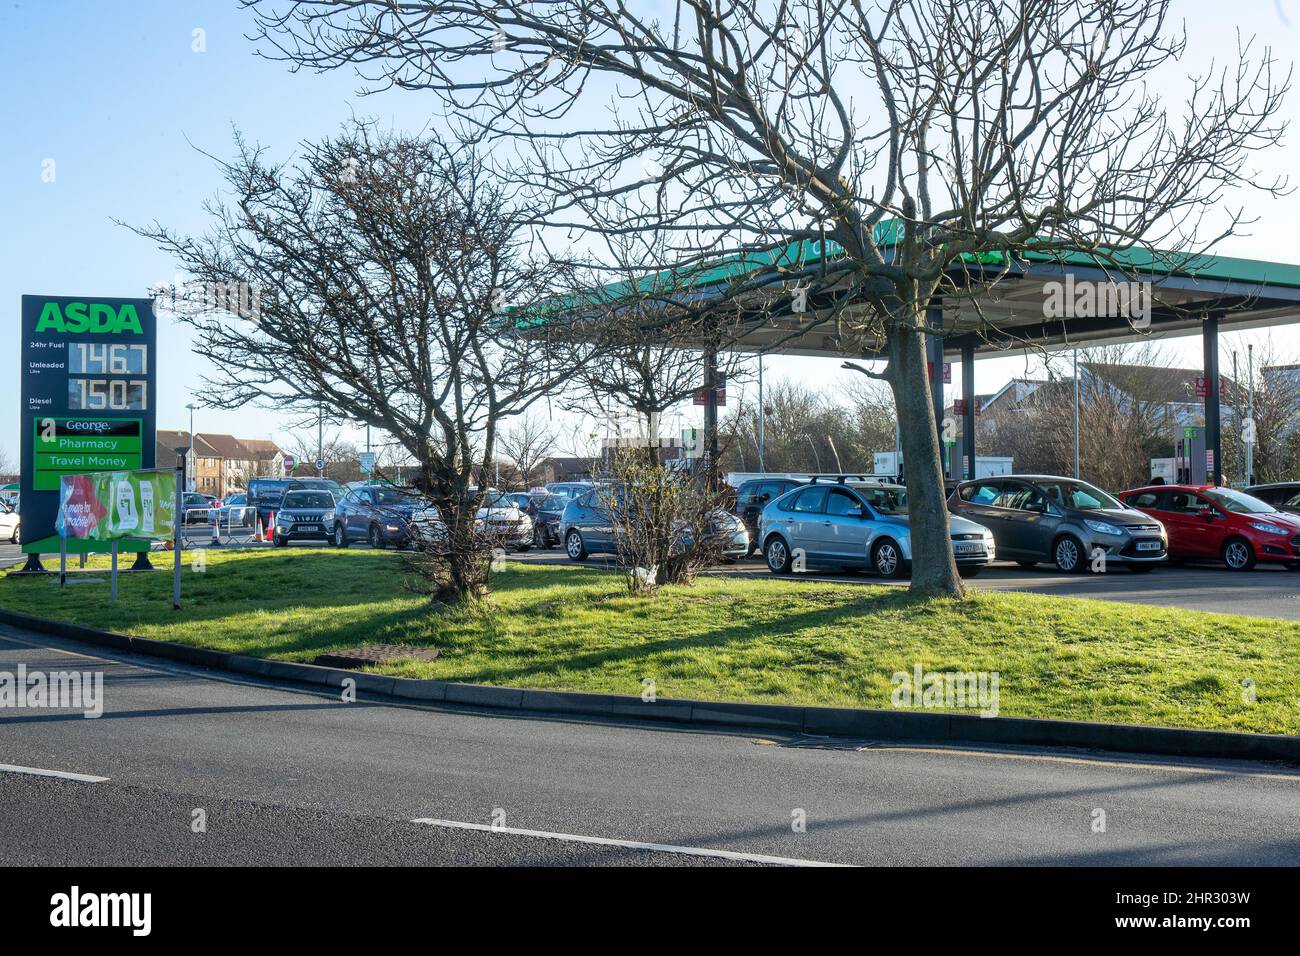 SHOEBURYNESS, ESSEX - FEBRUARY 25 2022, Queue at UK Petrol station as fuel prices increase amid Russia's attack on Ukraine. Credit: Lucy North/Alamy Live News Stock Photo